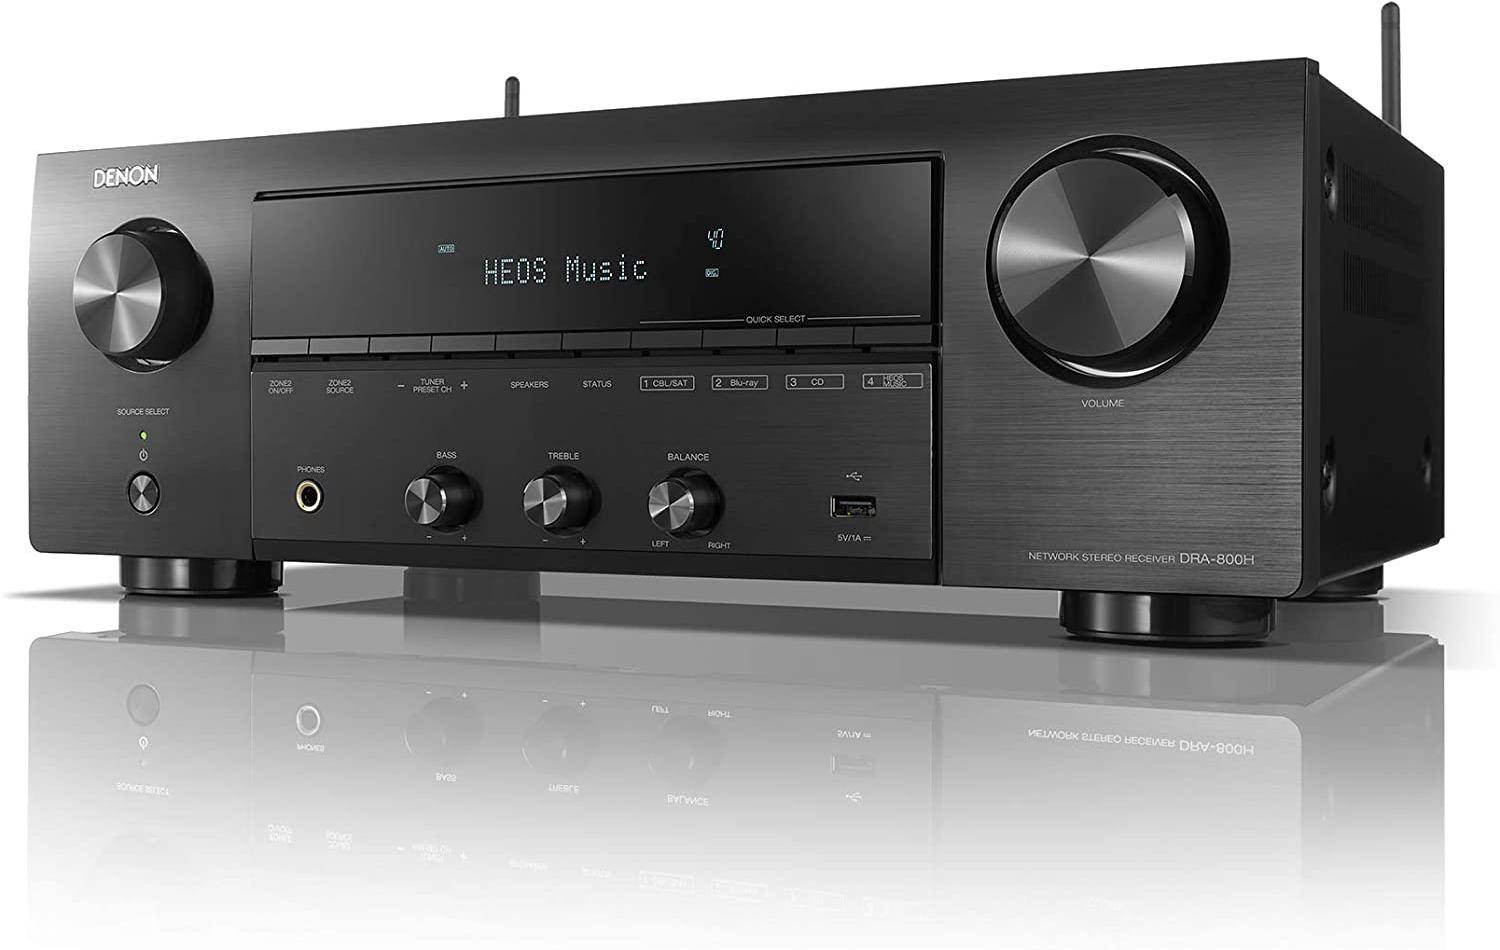 Denon DRA-800H 2-Channel Stereo Network Receiver (Hi-Fi Amplification) zoom image